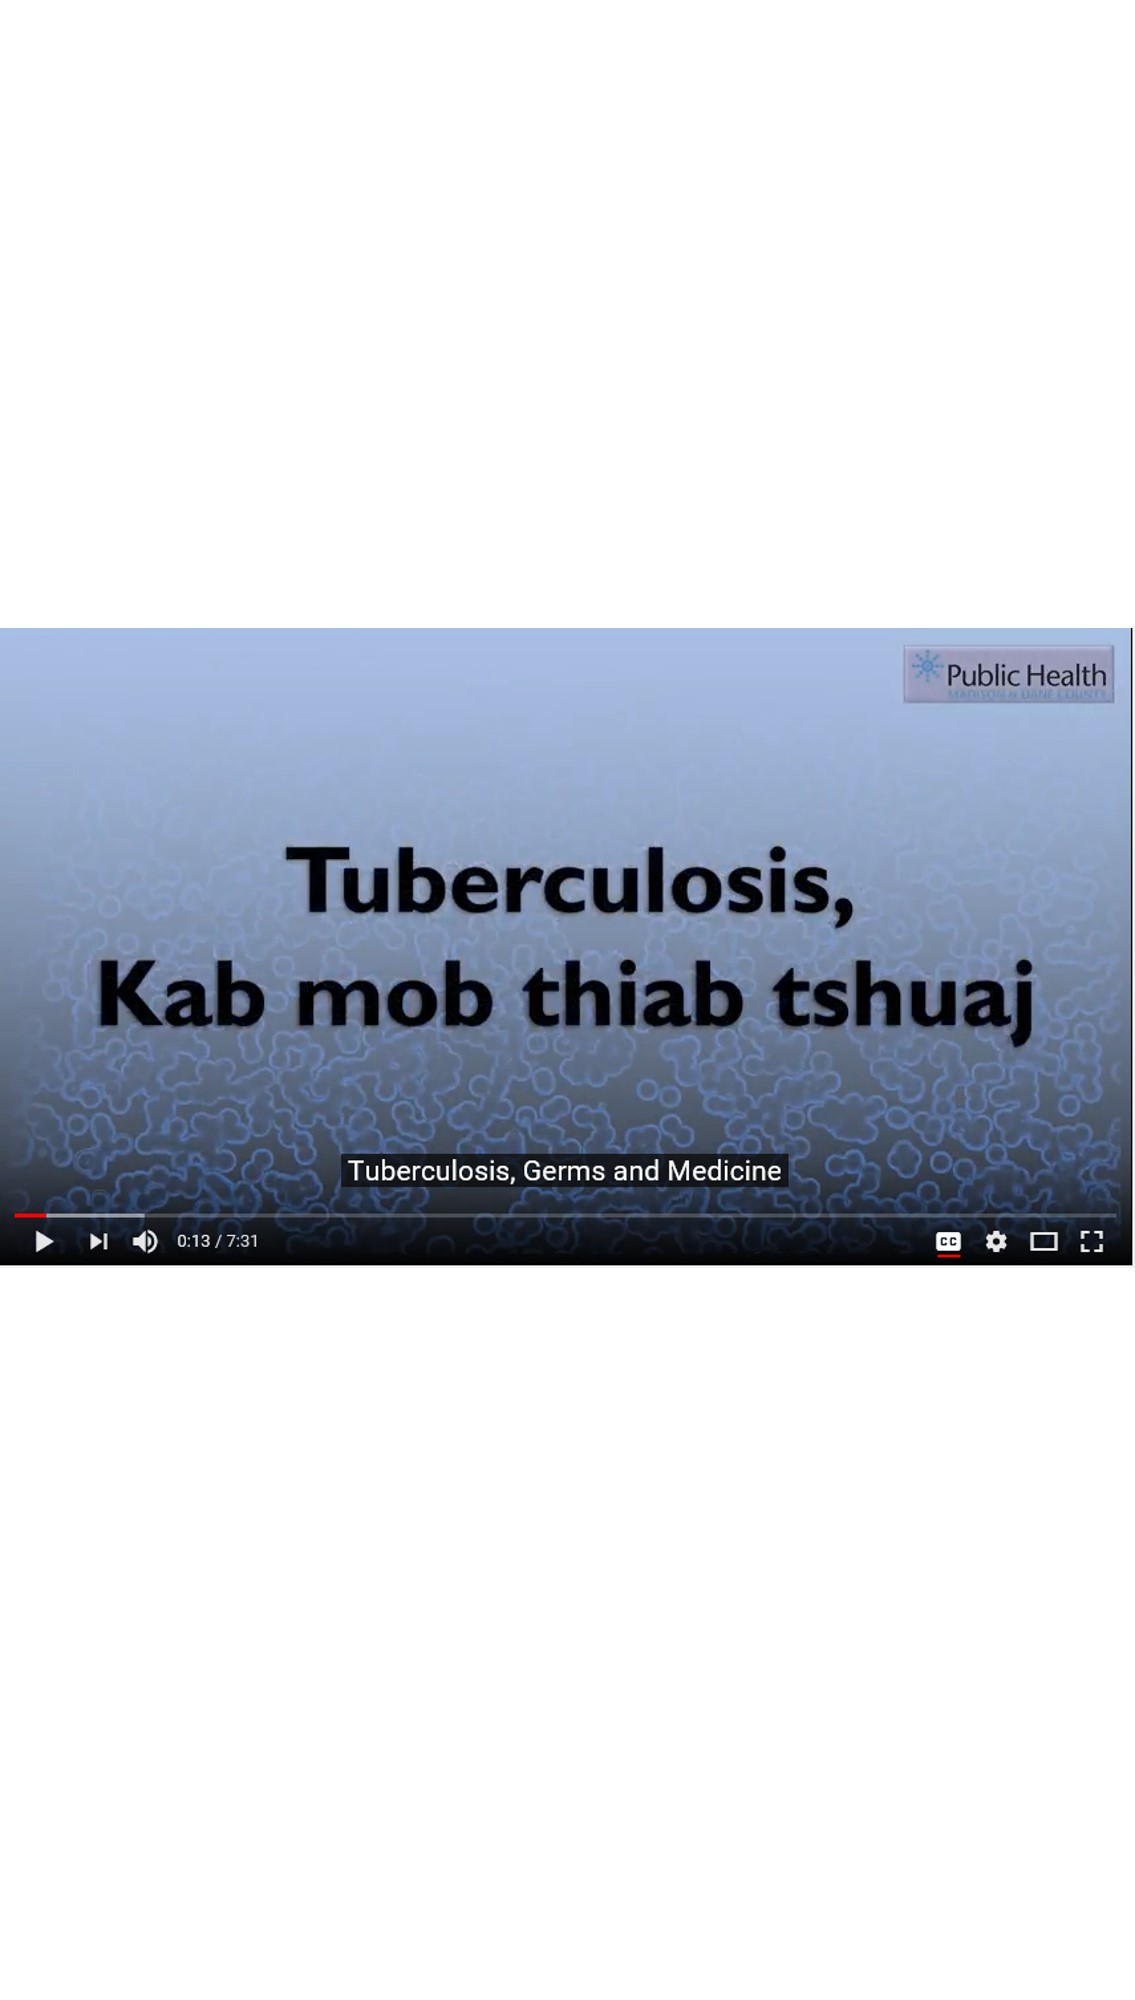 Tuberculosis, Germs, and Medicine